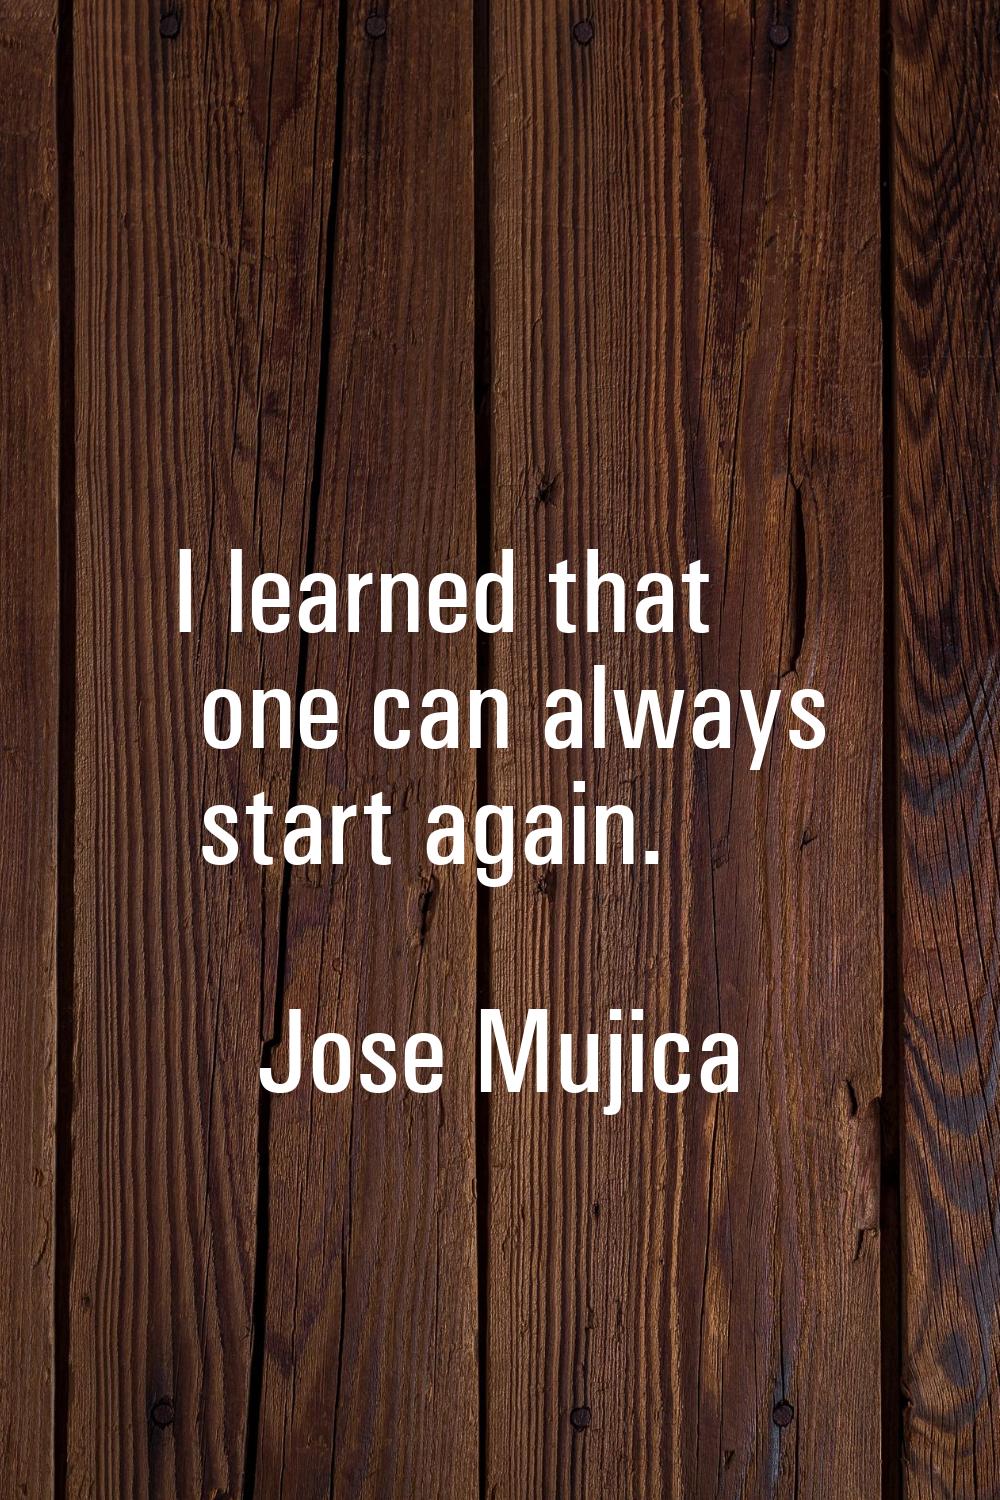 I learned that one can always start again.